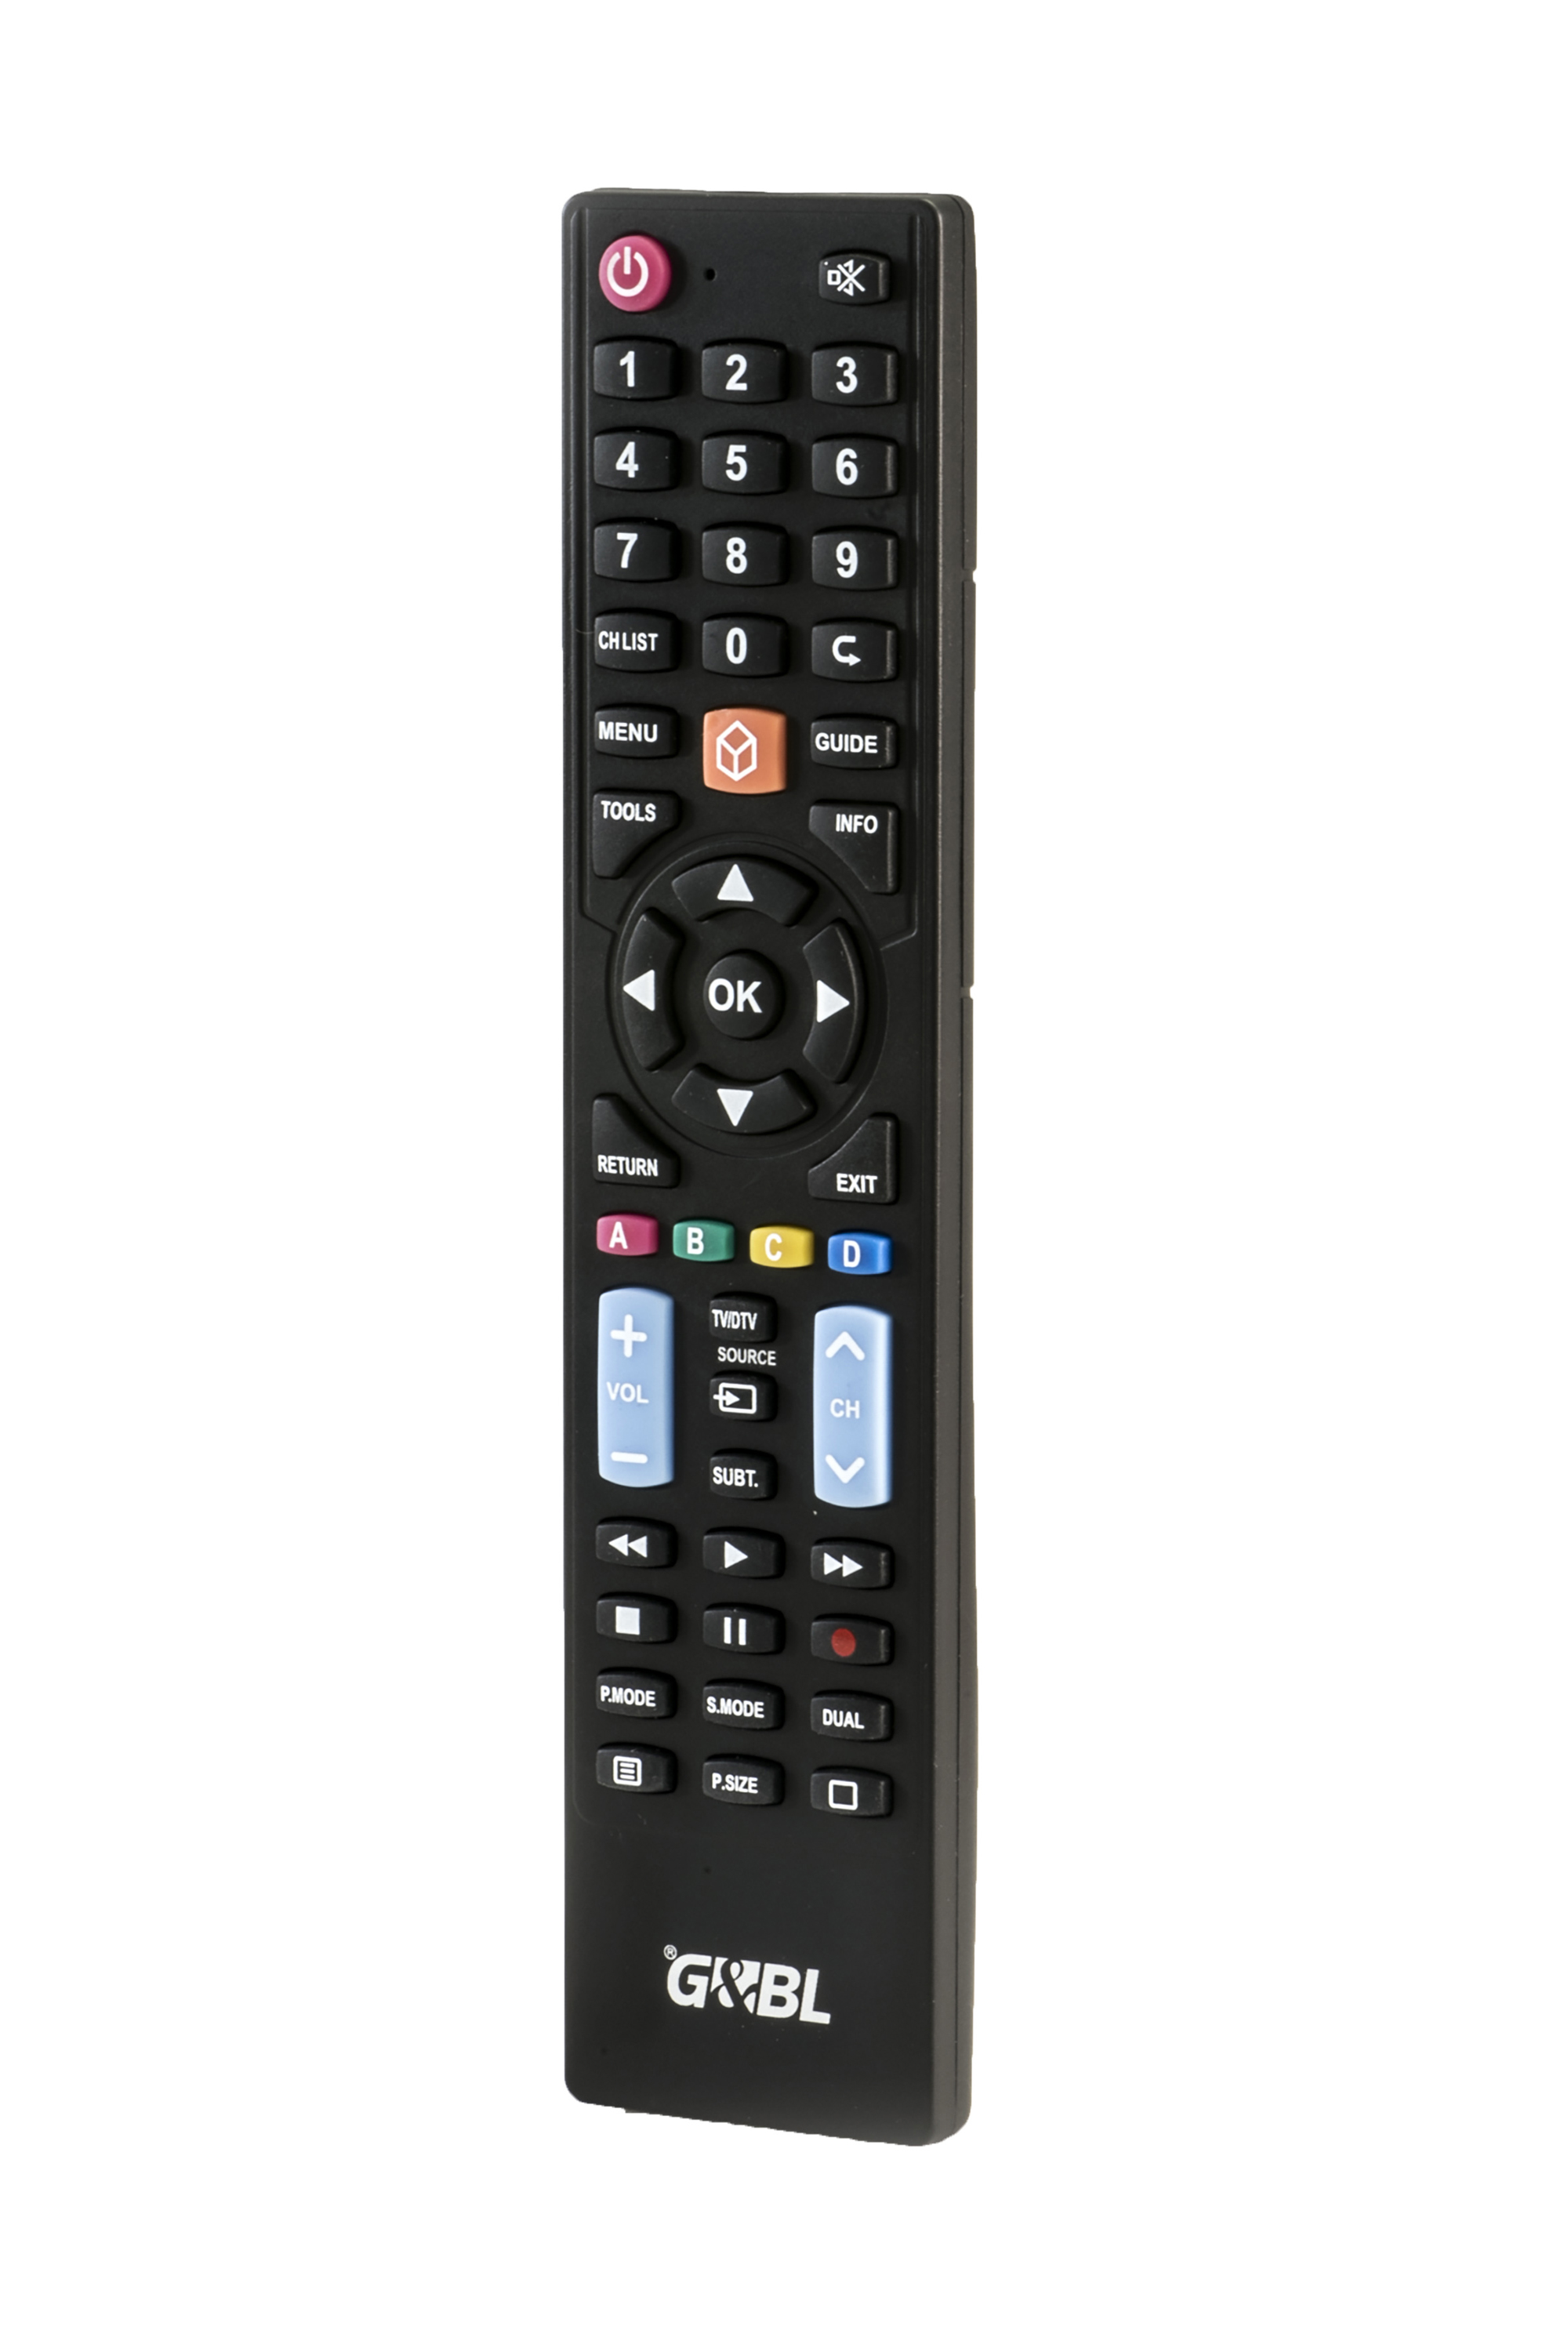 8001 - Universal remote control 5 brands in 1 ( Samsung-LG-Philips-Sony-Pan